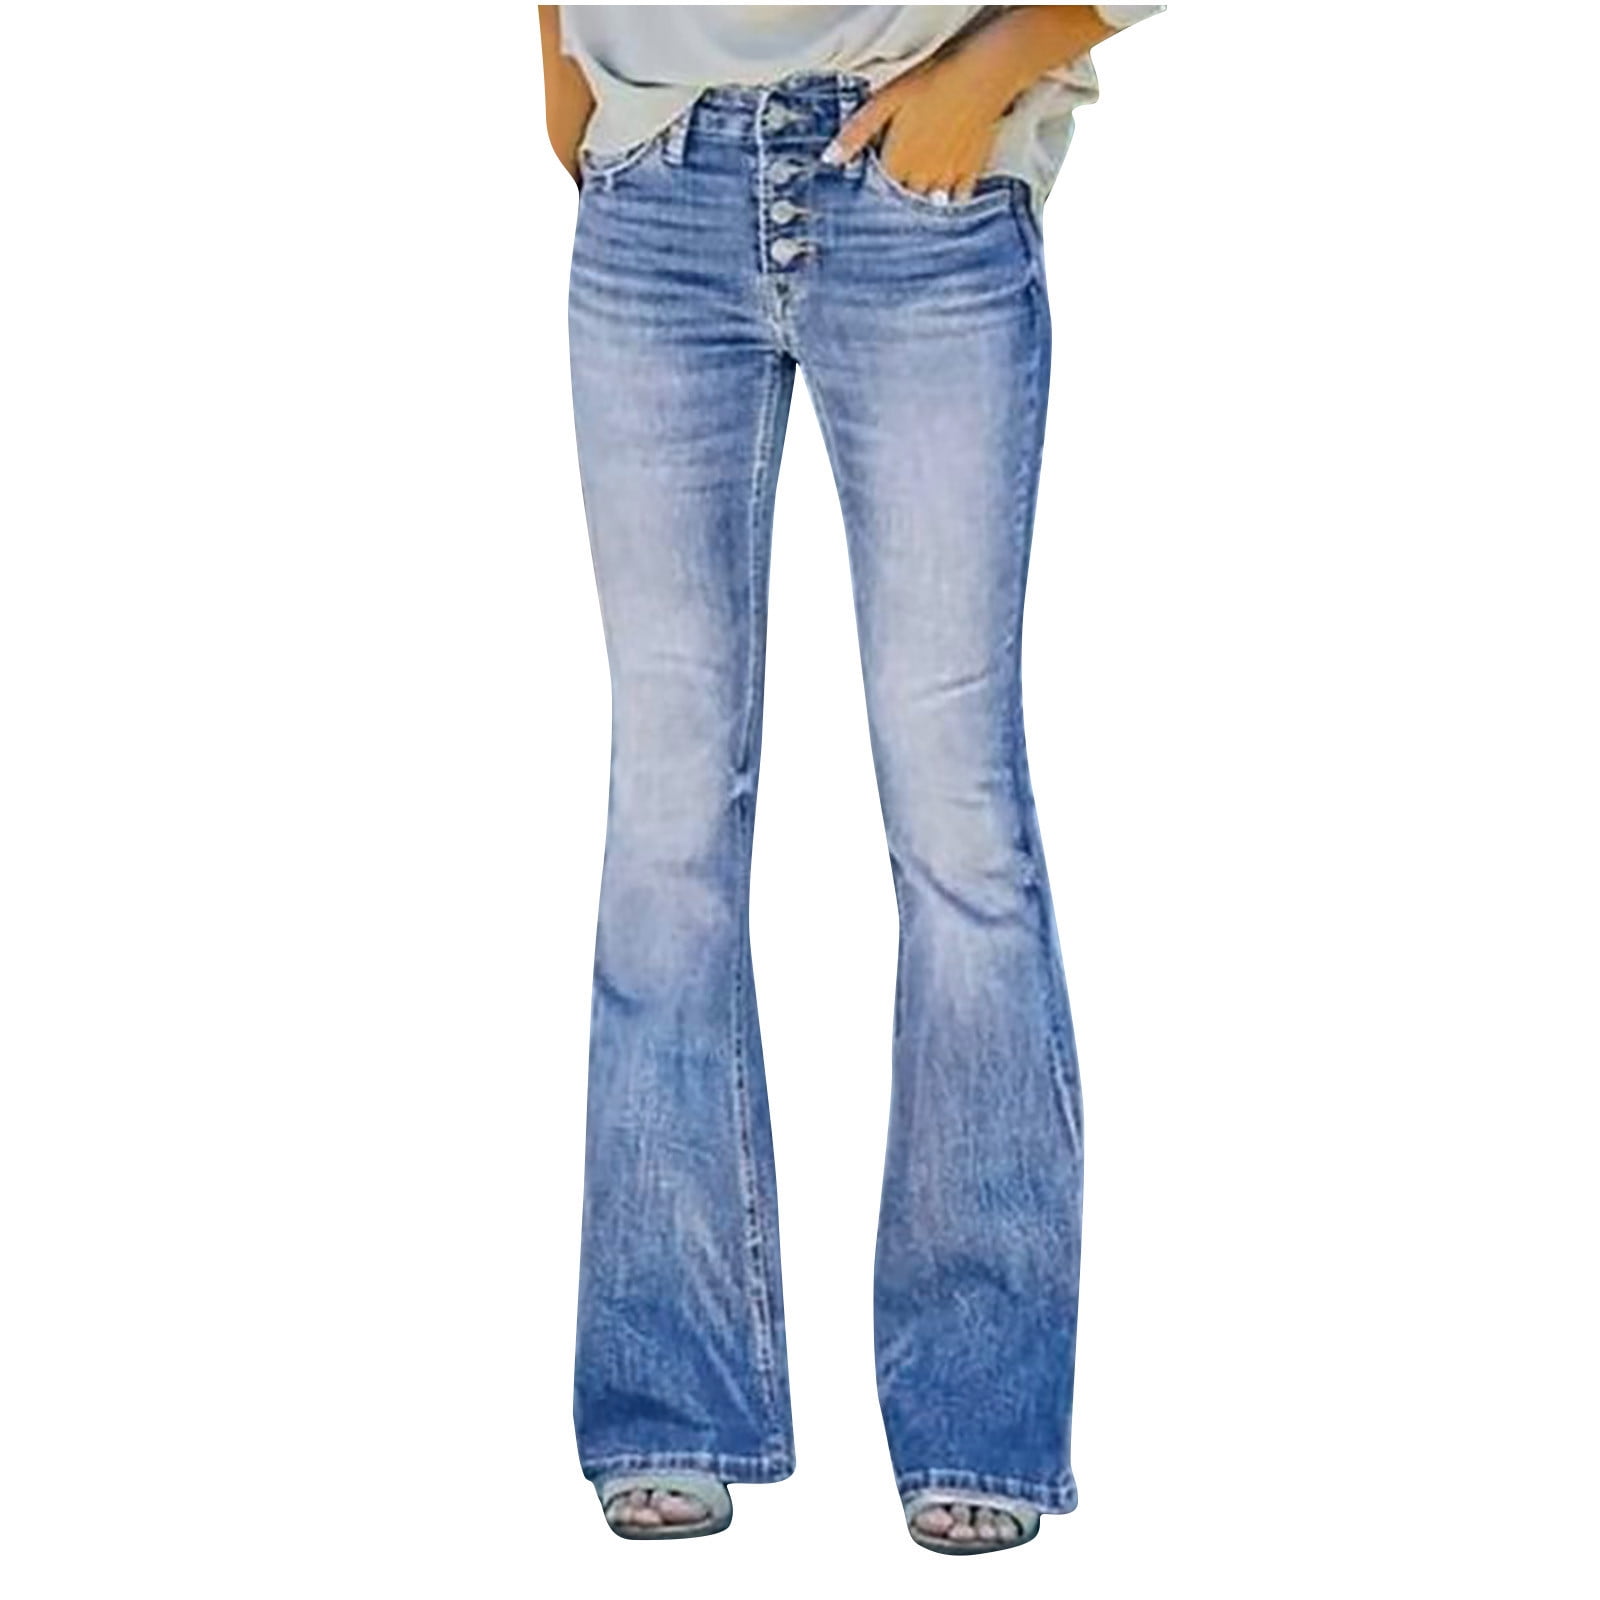 Fashionable Women's Bell Bottom Jeans - Shop Now